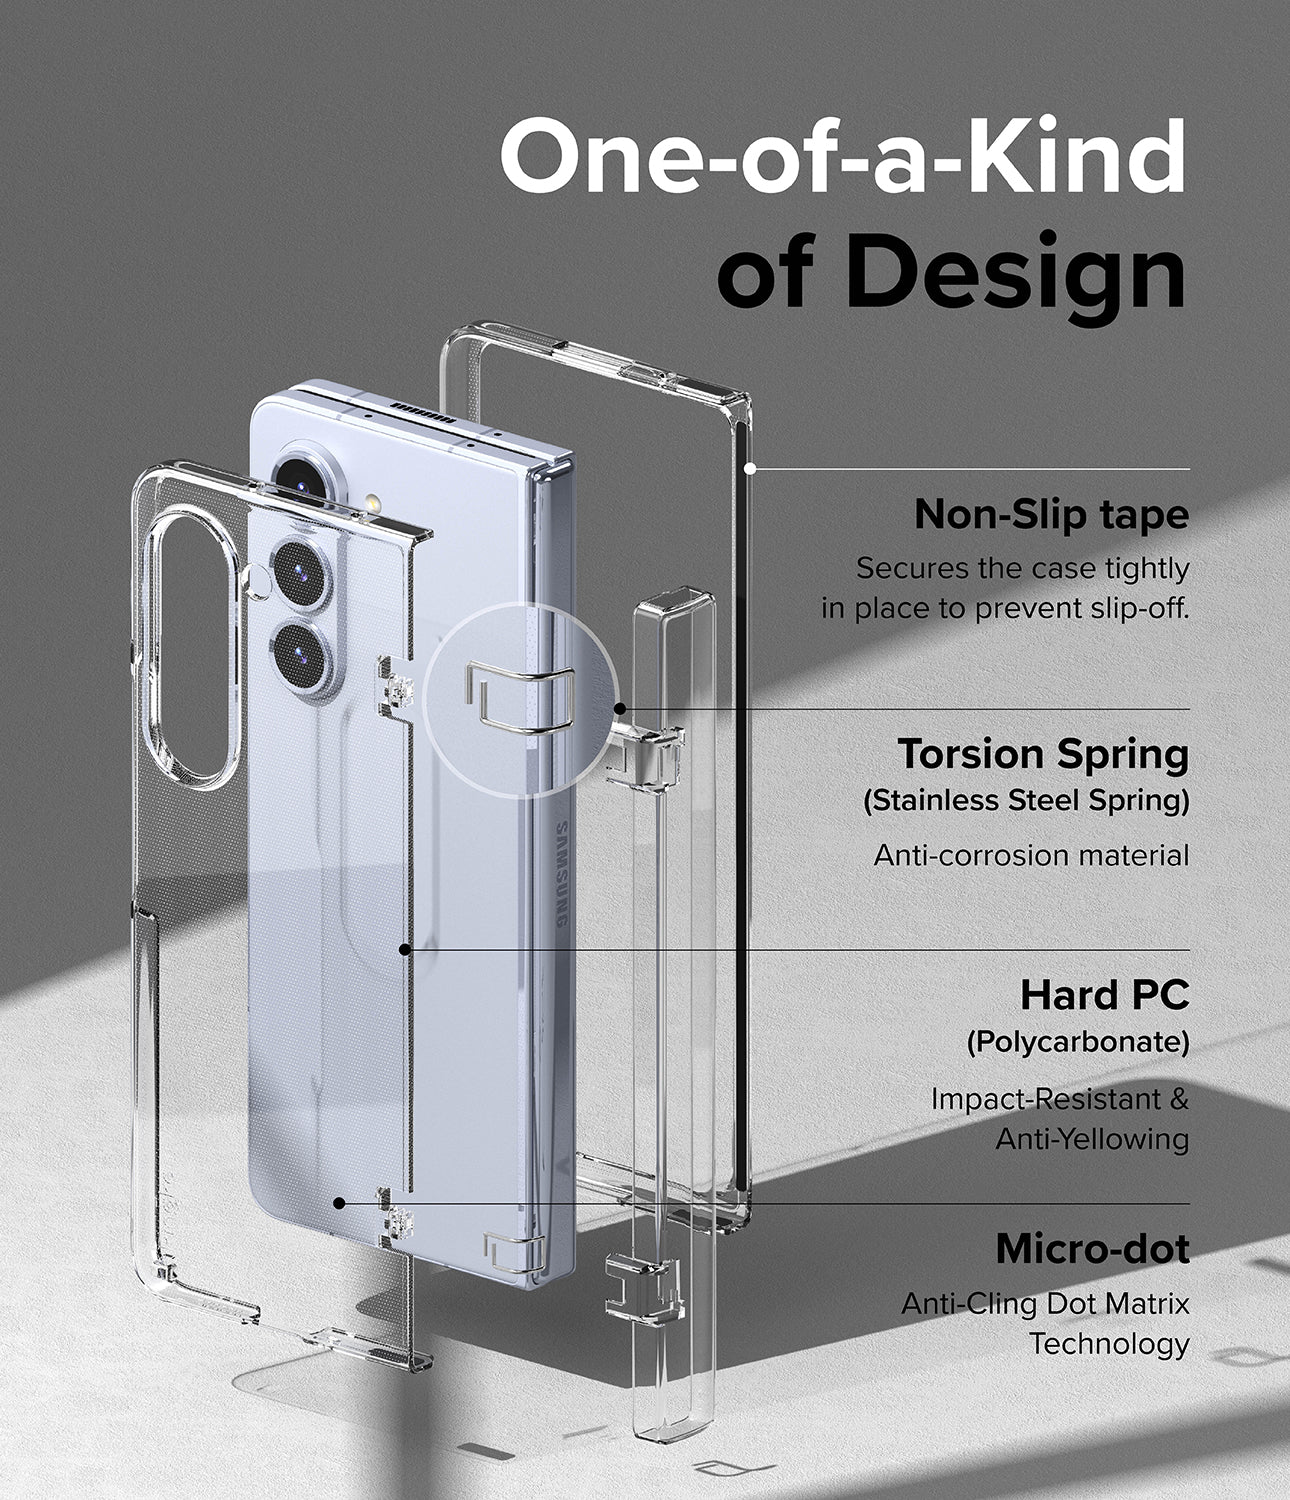 Galaxy Z Fold 5 Case | Slim Hinge - One of a Kind of Design. Non-Slip Tape. Secures the case tightly in place to prevent slip-off. Torsion Spring (Stainless Steel Spring) Anti-corrosion material. Hard PC (Polycarbonate) Impact-Resistant and Anti-Yellowing. Micro-dot. Anti-Cling Dot Matrix Technology